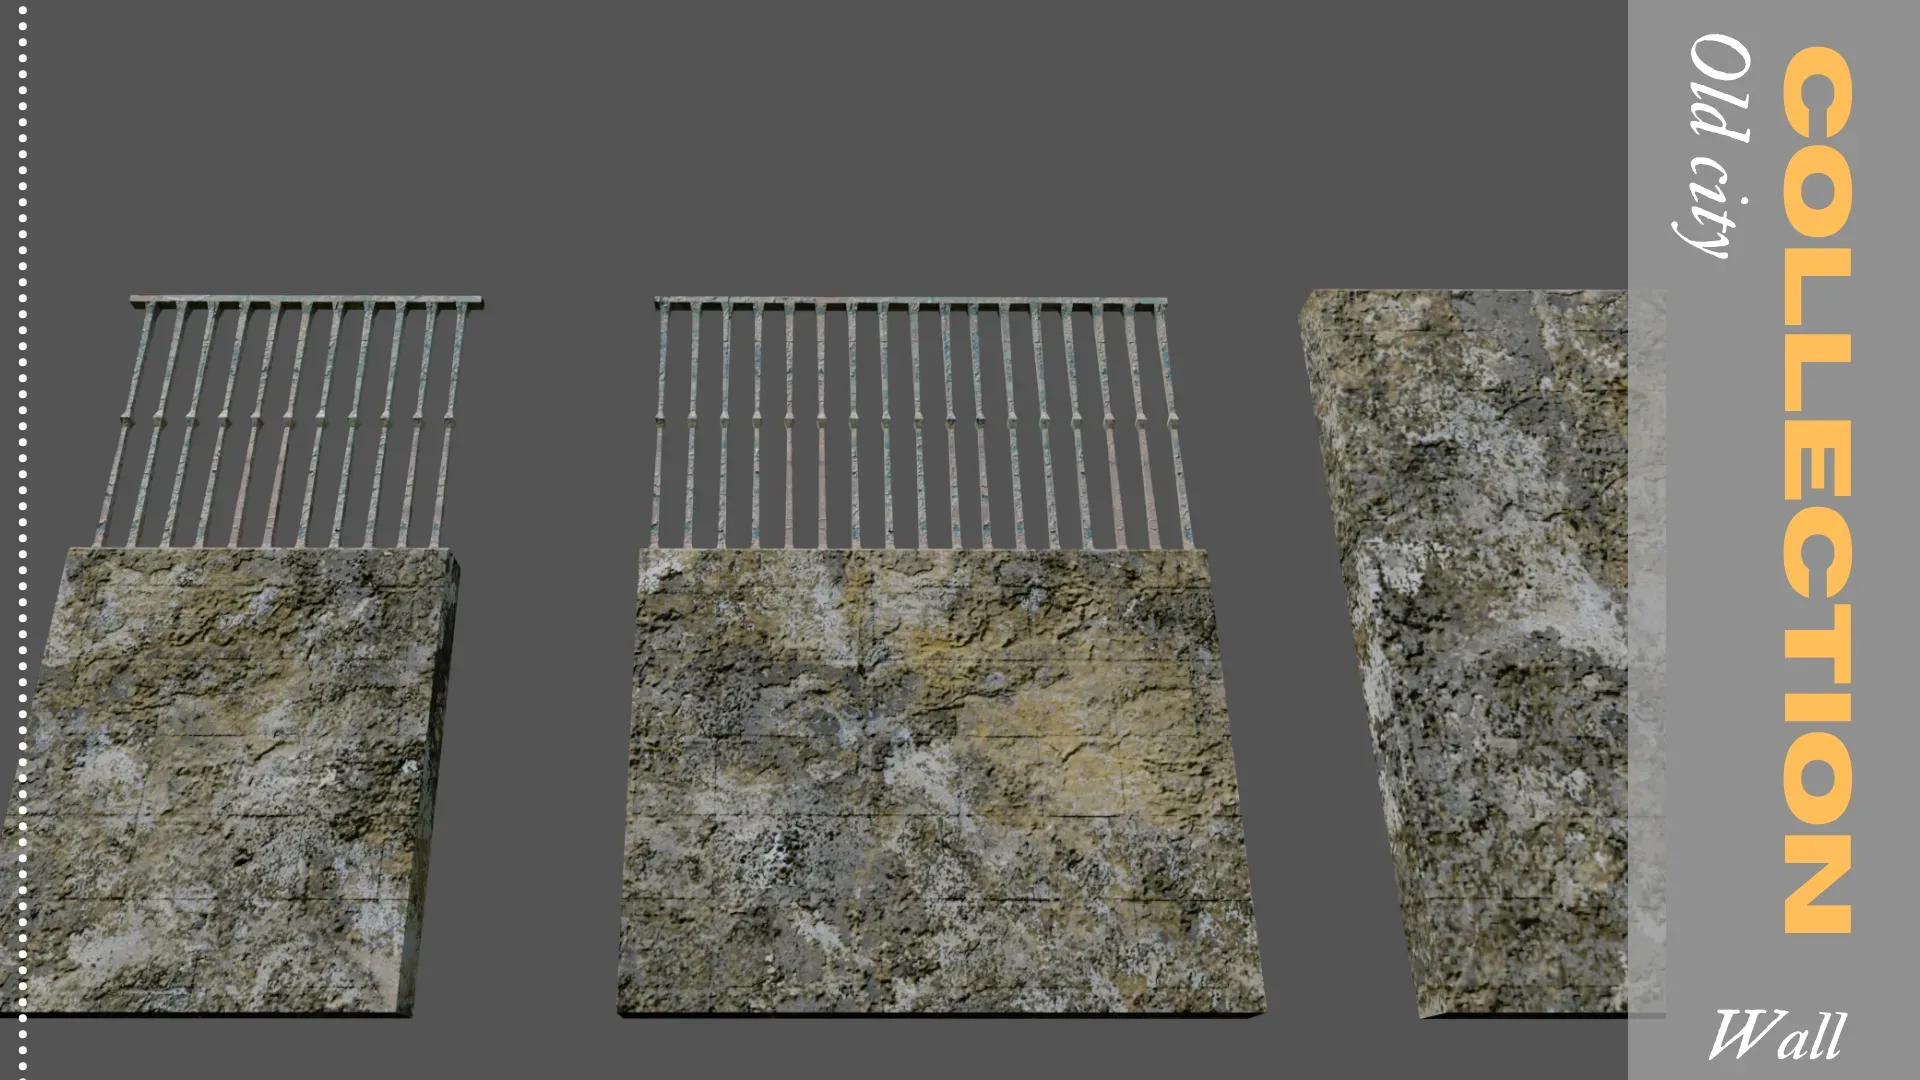 MODULAR WALLS FOR 3D COMPOSITIONS Low-poly 3D model